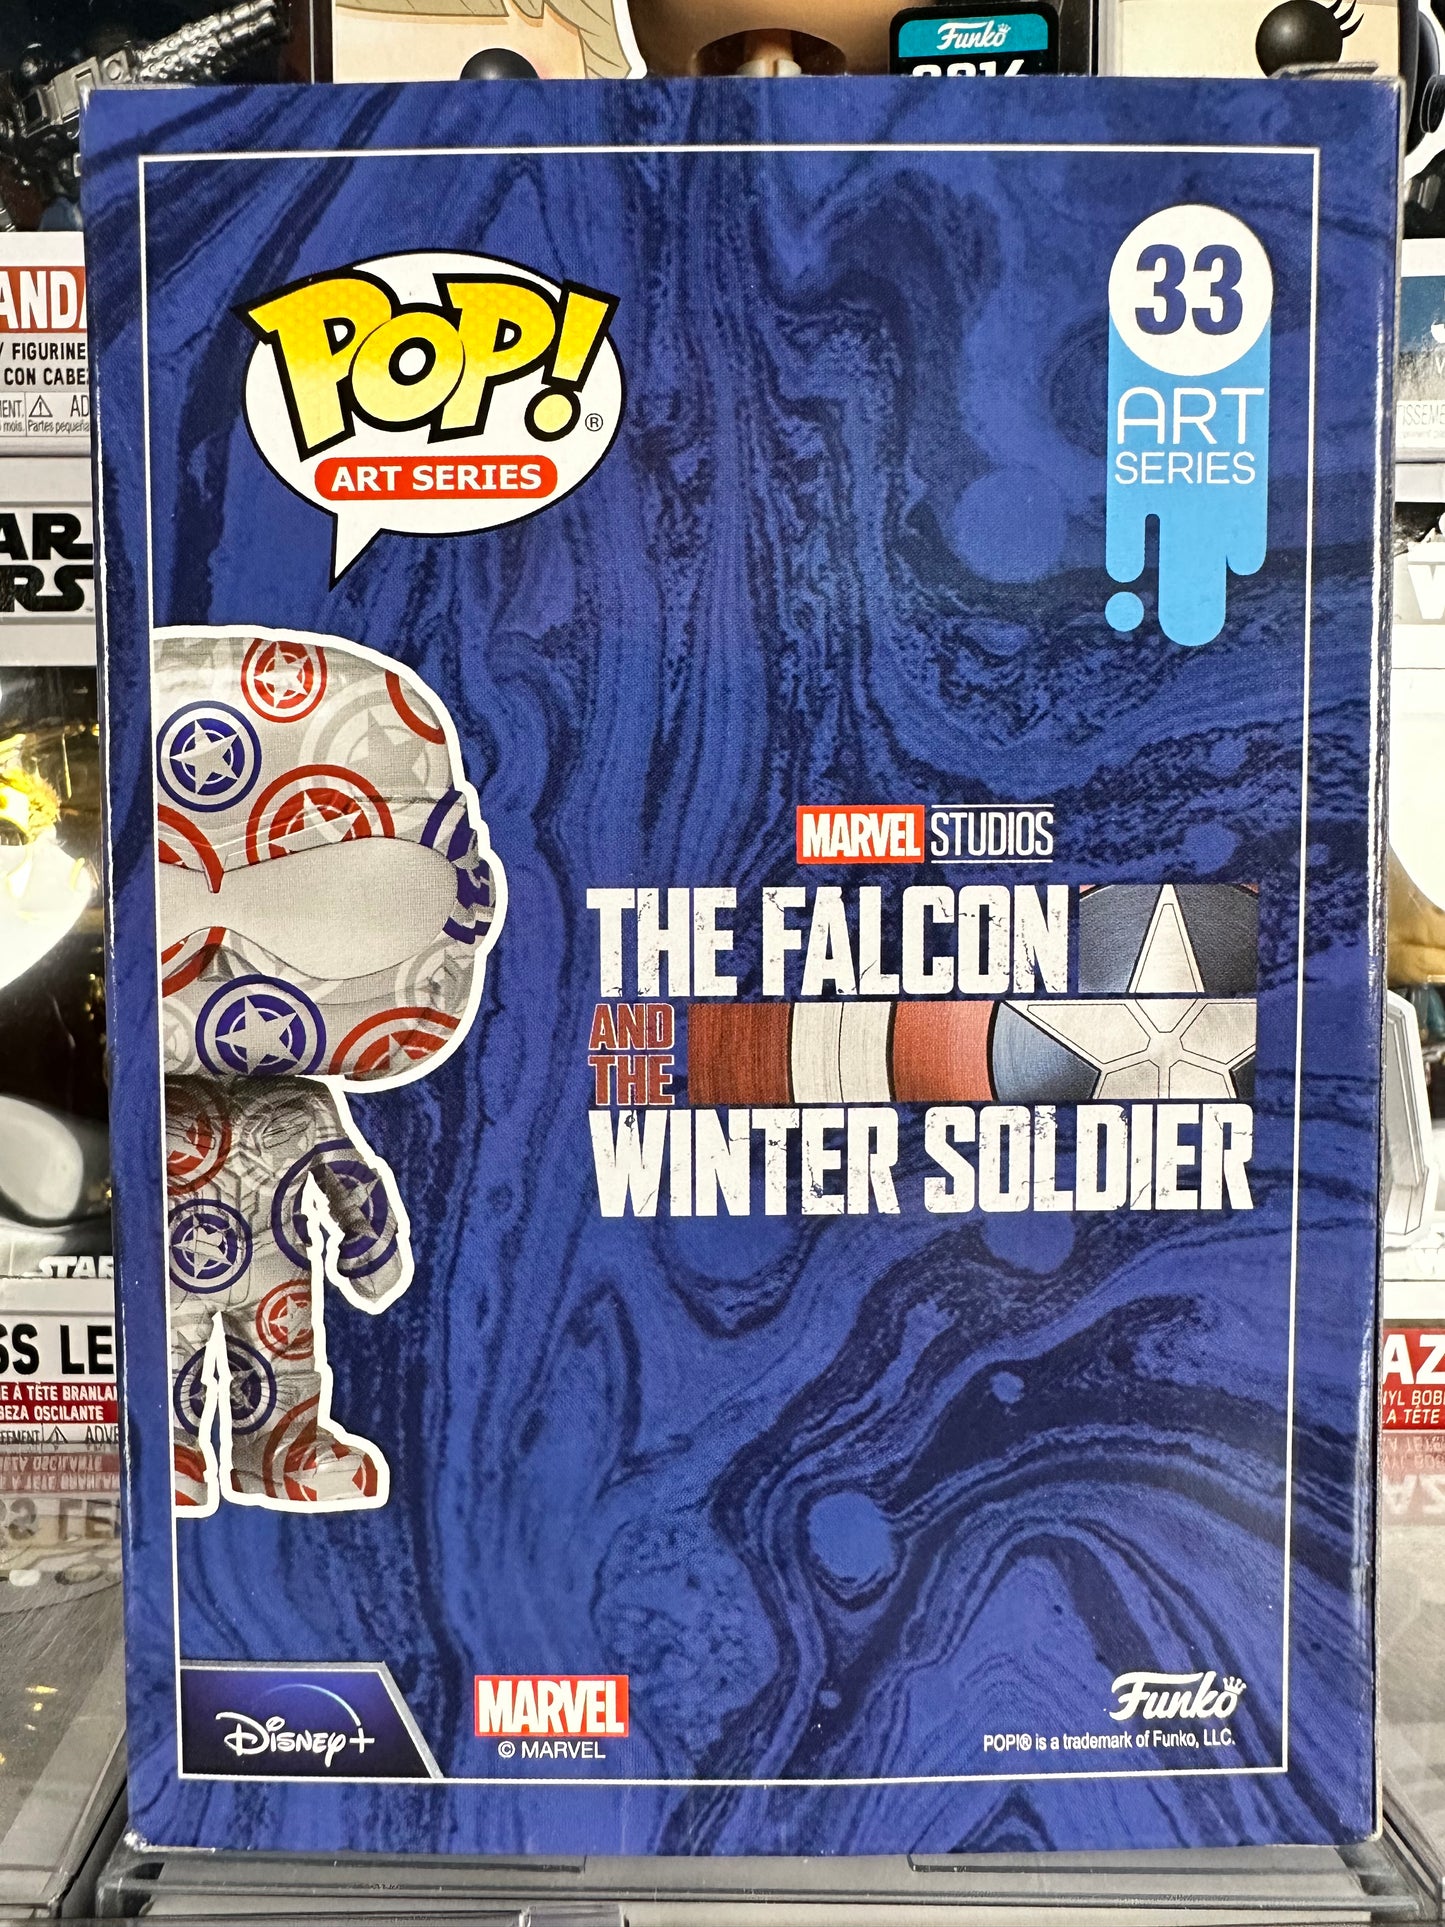 Marvel The Falcon and the Winter Soldier - Captain America (Art Series) (33)